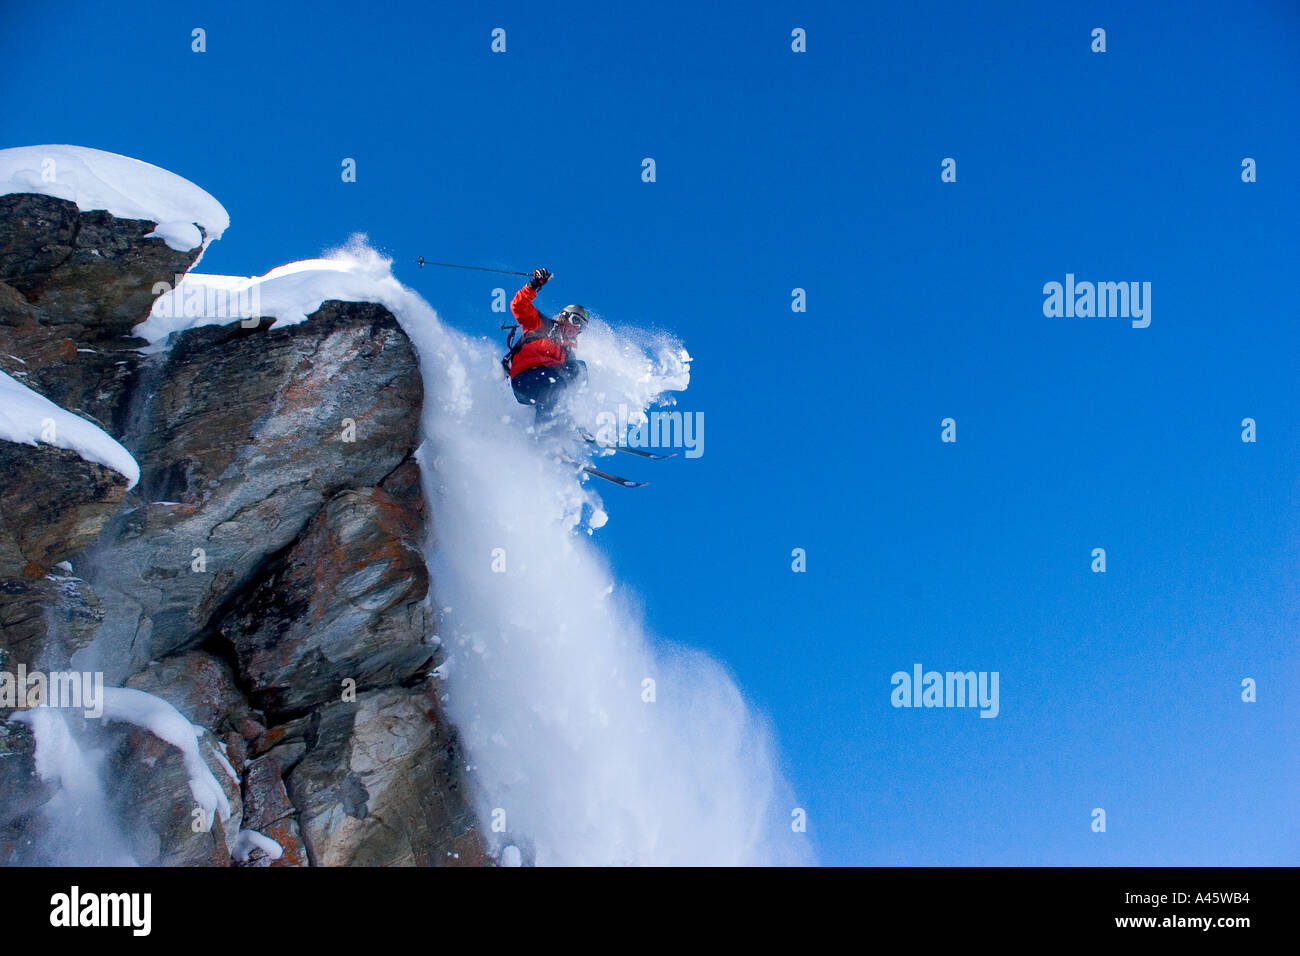 British skier Nick Southwell jumping off an overhang at Verbier Switzerland Stock Photo